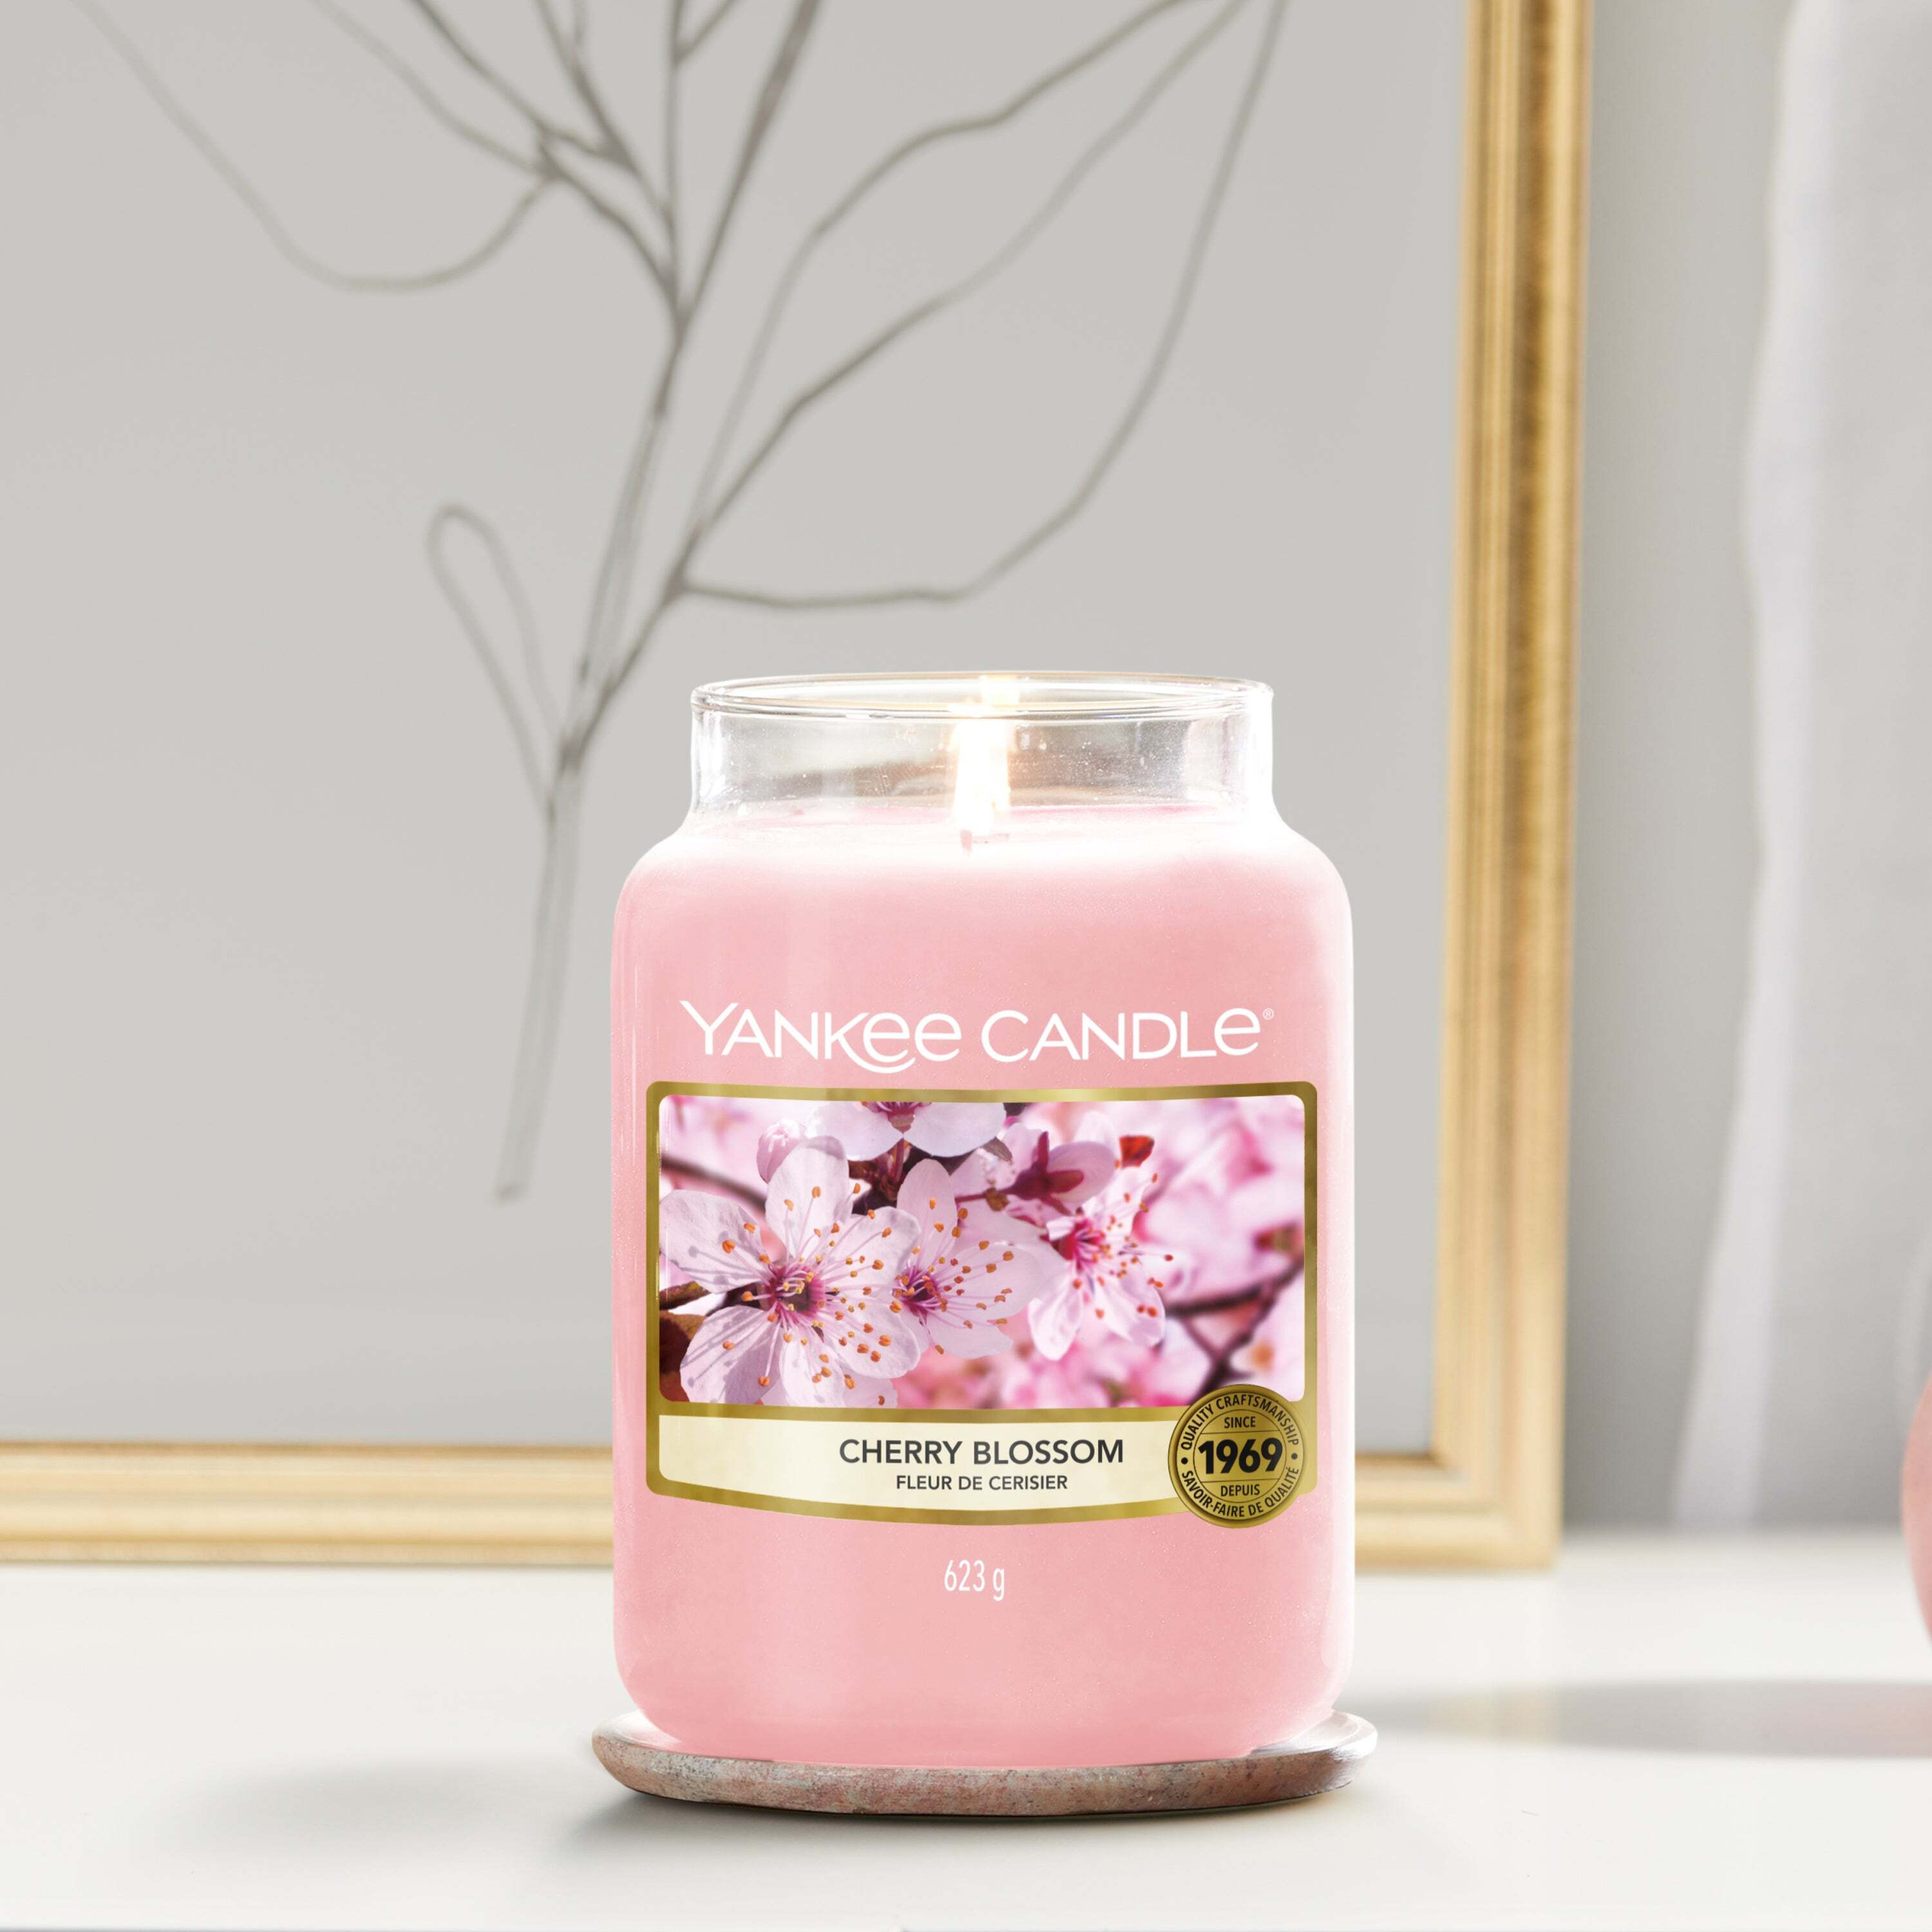 Yankee Candle Cherry Blossom Original Large Jar Candle Pink